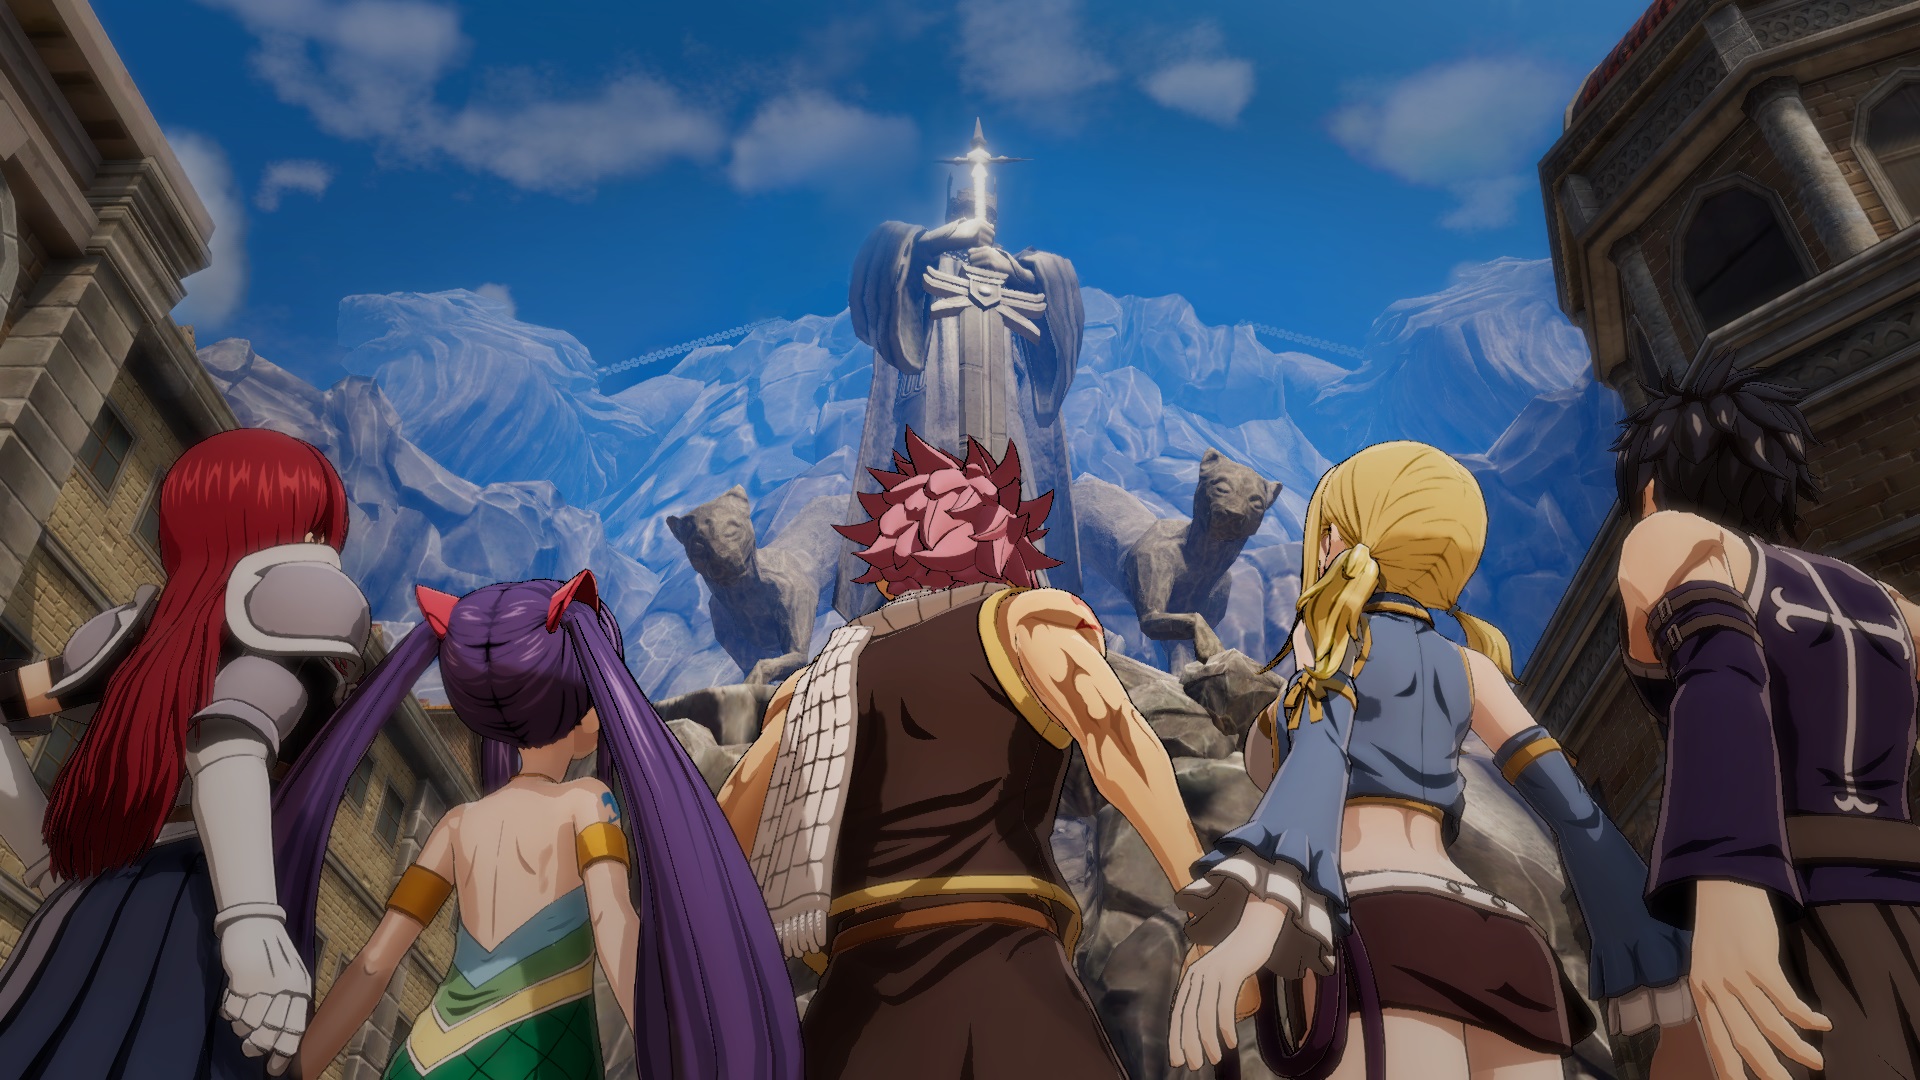 Fairy Tail Details Story And Characters In New Screenshots